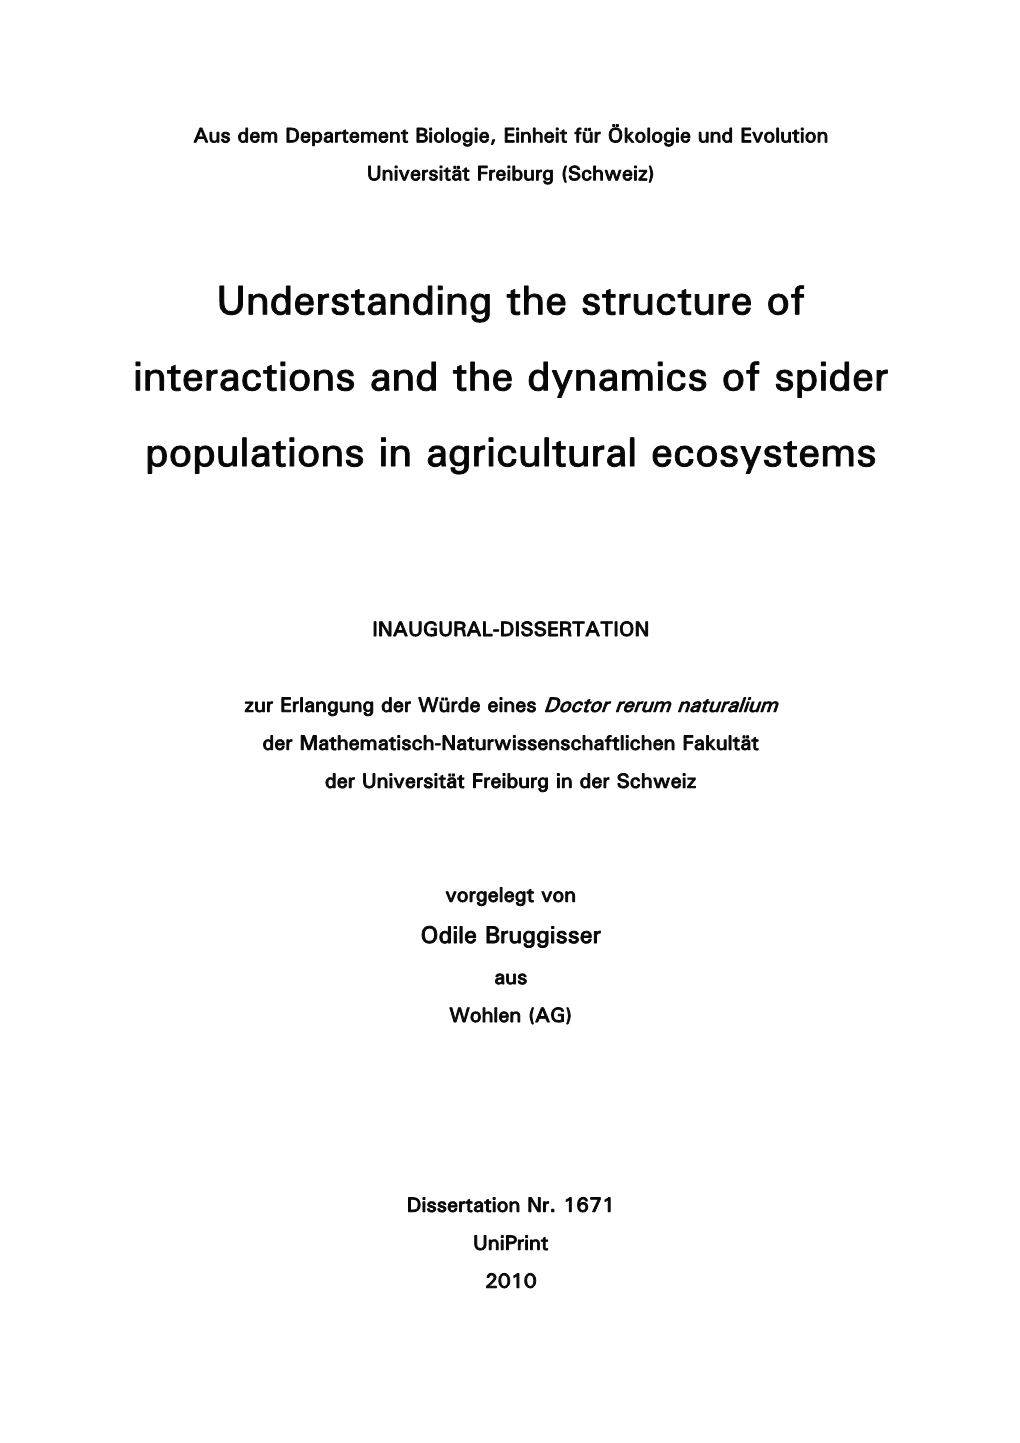 Understanding the Structure of Interactions and the Dynamics of Spider Populations in Agricultural Ecosystems